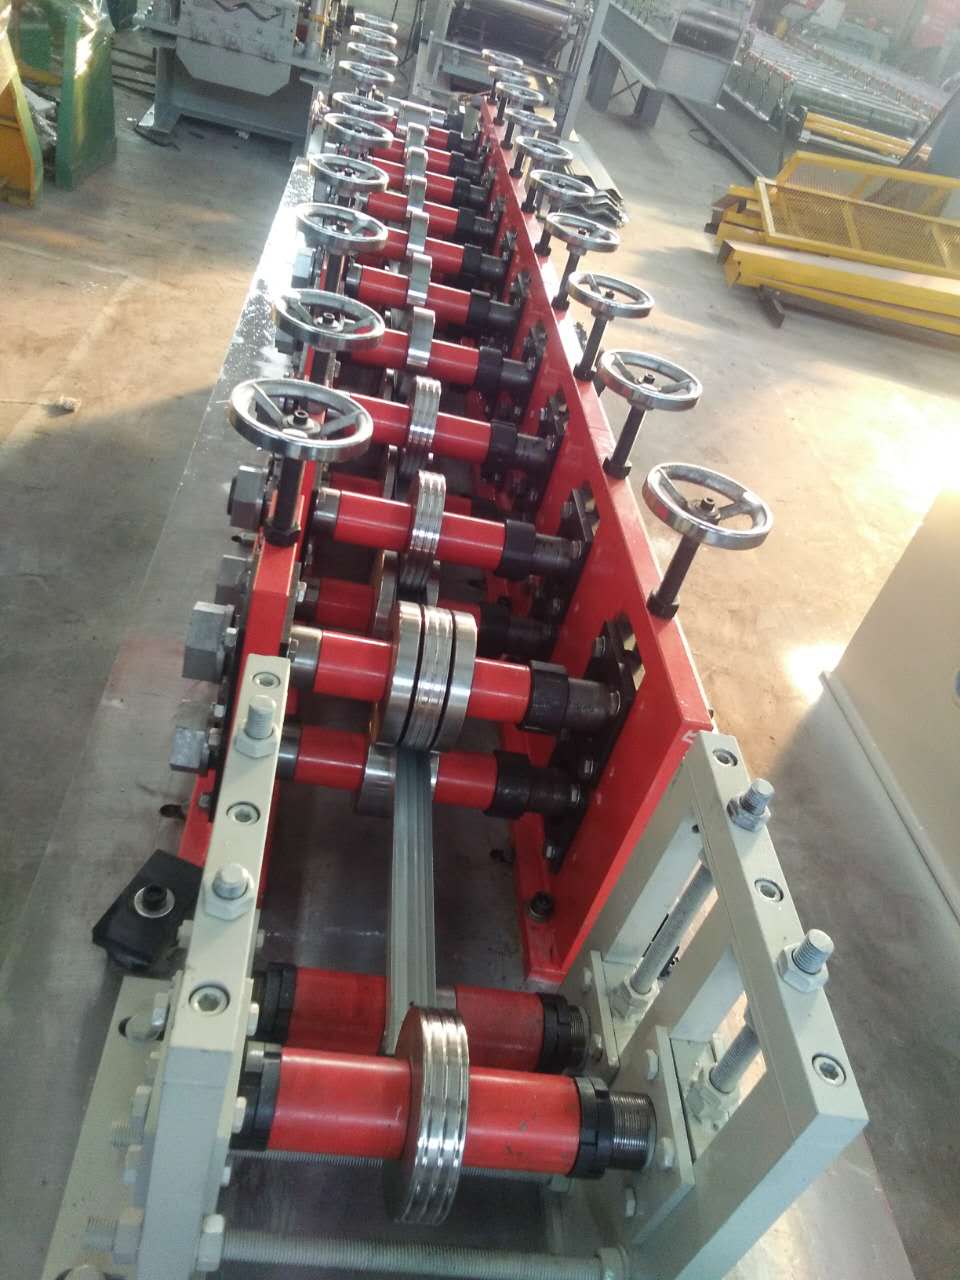 light keel cd ud roll forming machine export to turkey